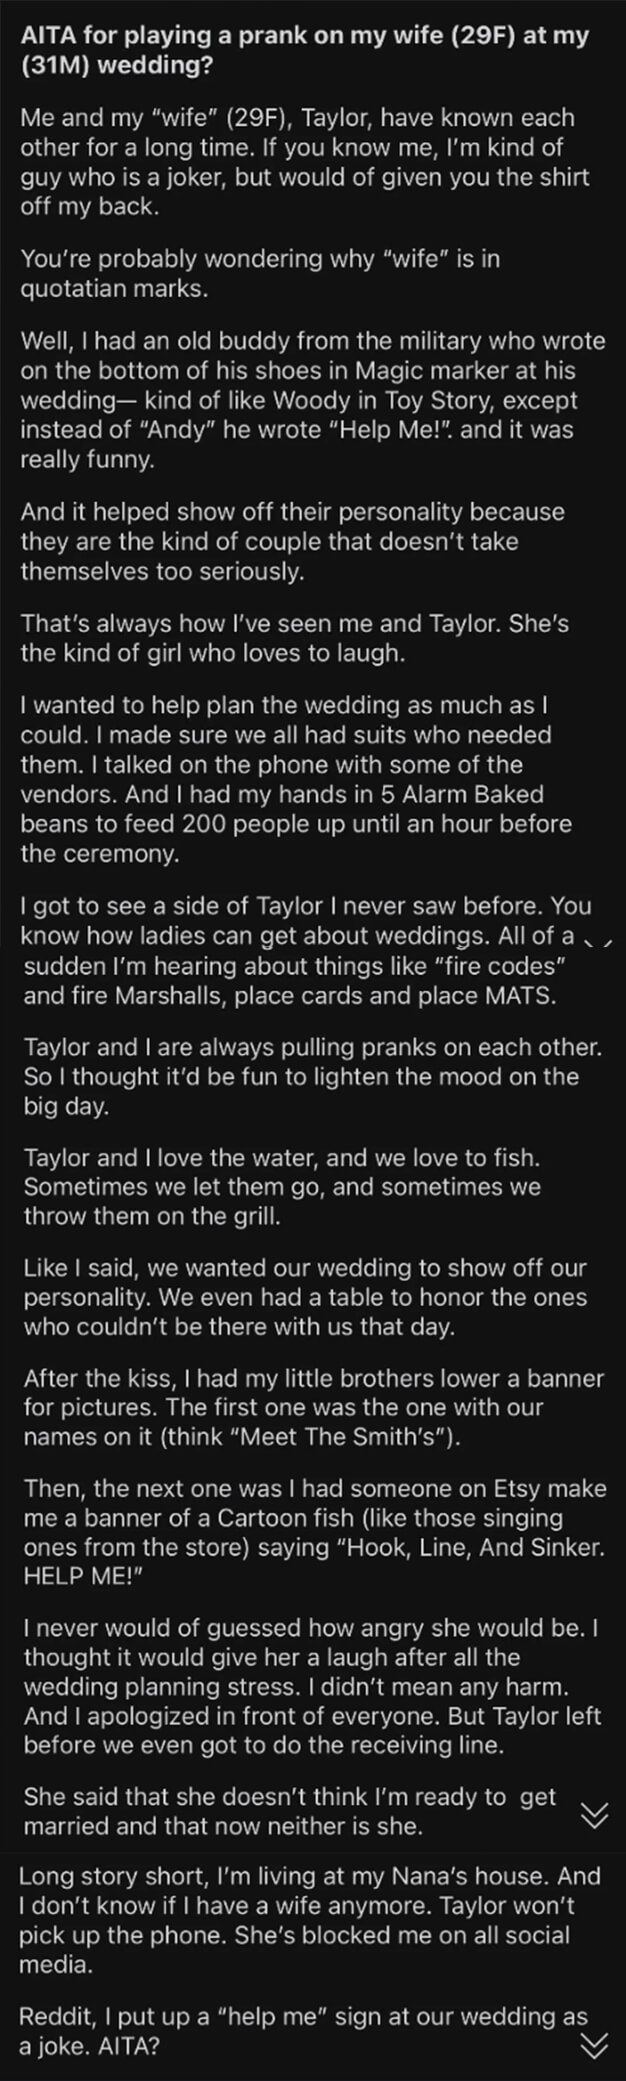 groom playing a prank on his new wife at the wedding